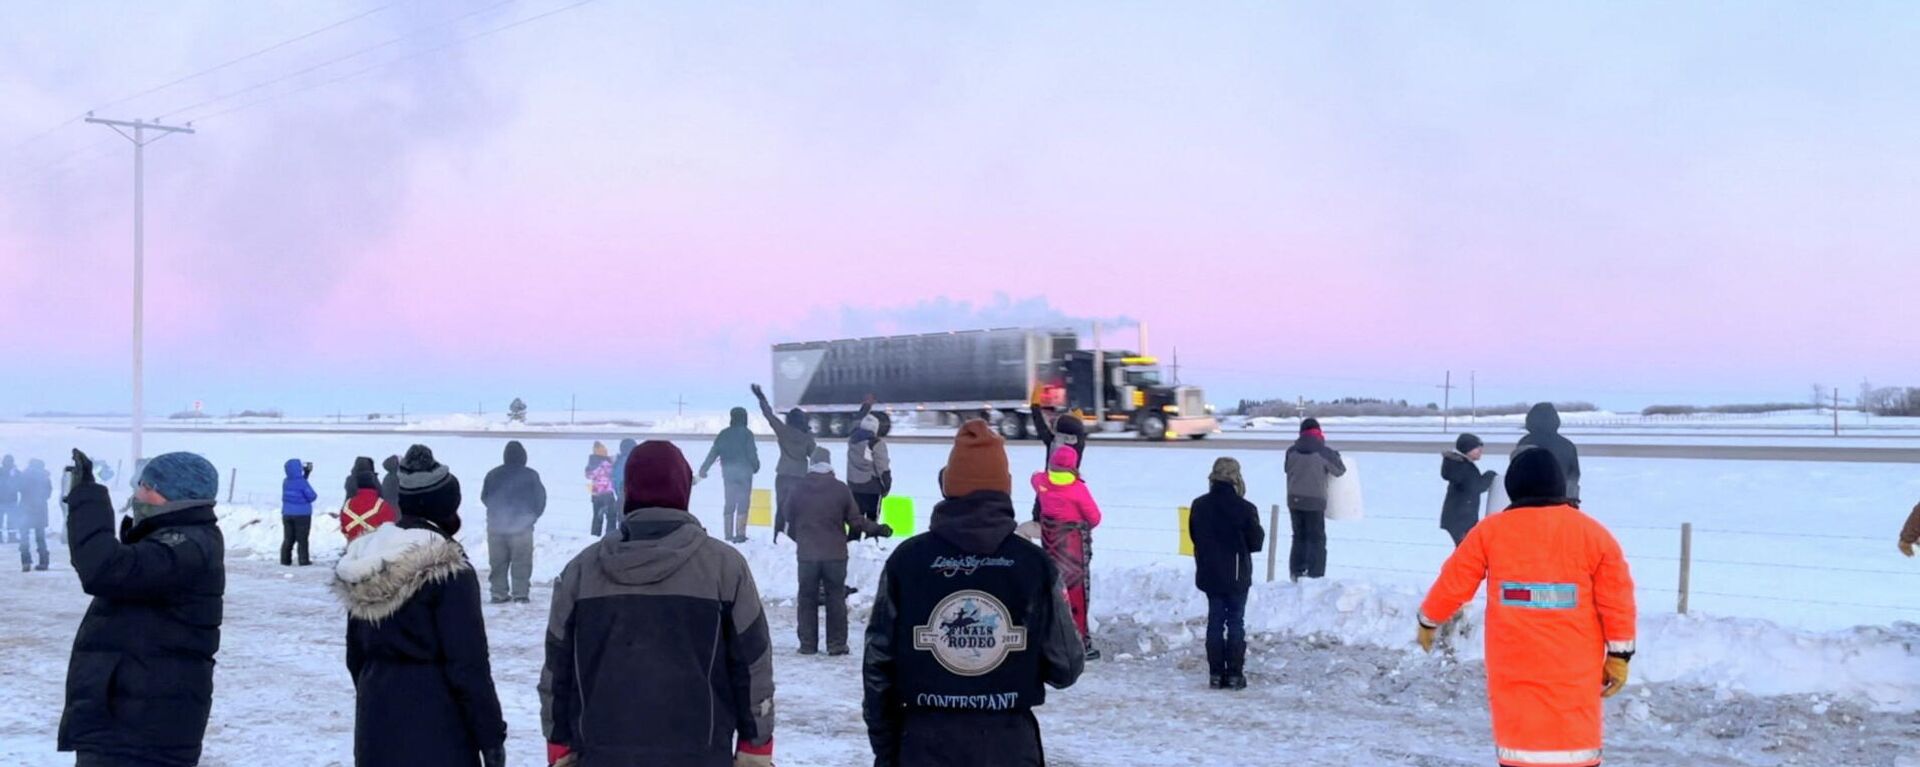 Family, friends and neighbours gather to show support for the freedom convoy on the Trans-Canada highway in Grenfell, Saskatchewan, Canada January 25, 2022 in this screenshot obtained from a video on social media - Sputnik International, 1920, 03.02.2022